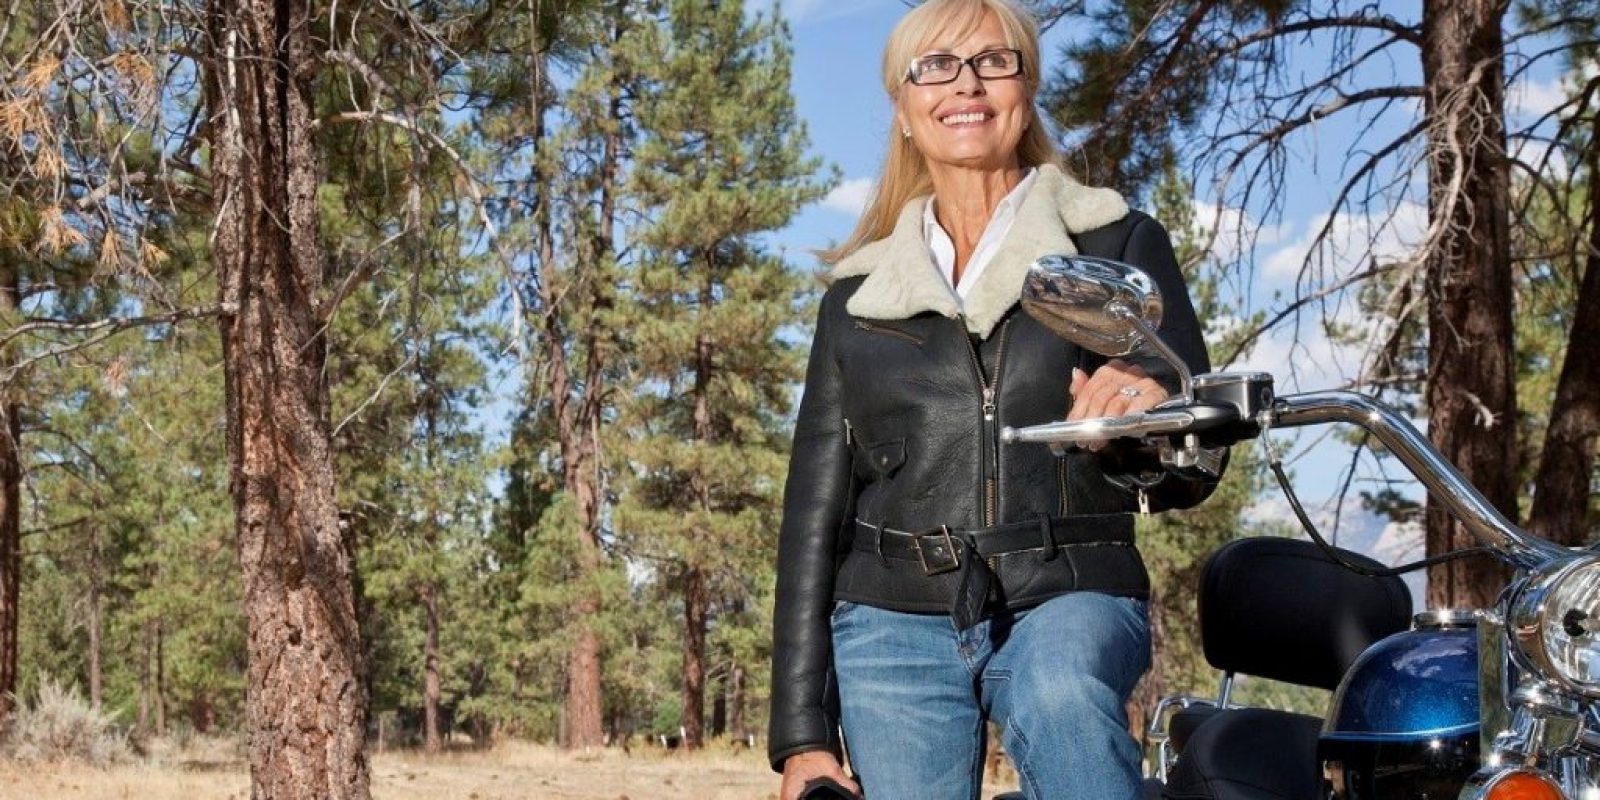 Senior woman poses with motorcycle in forest